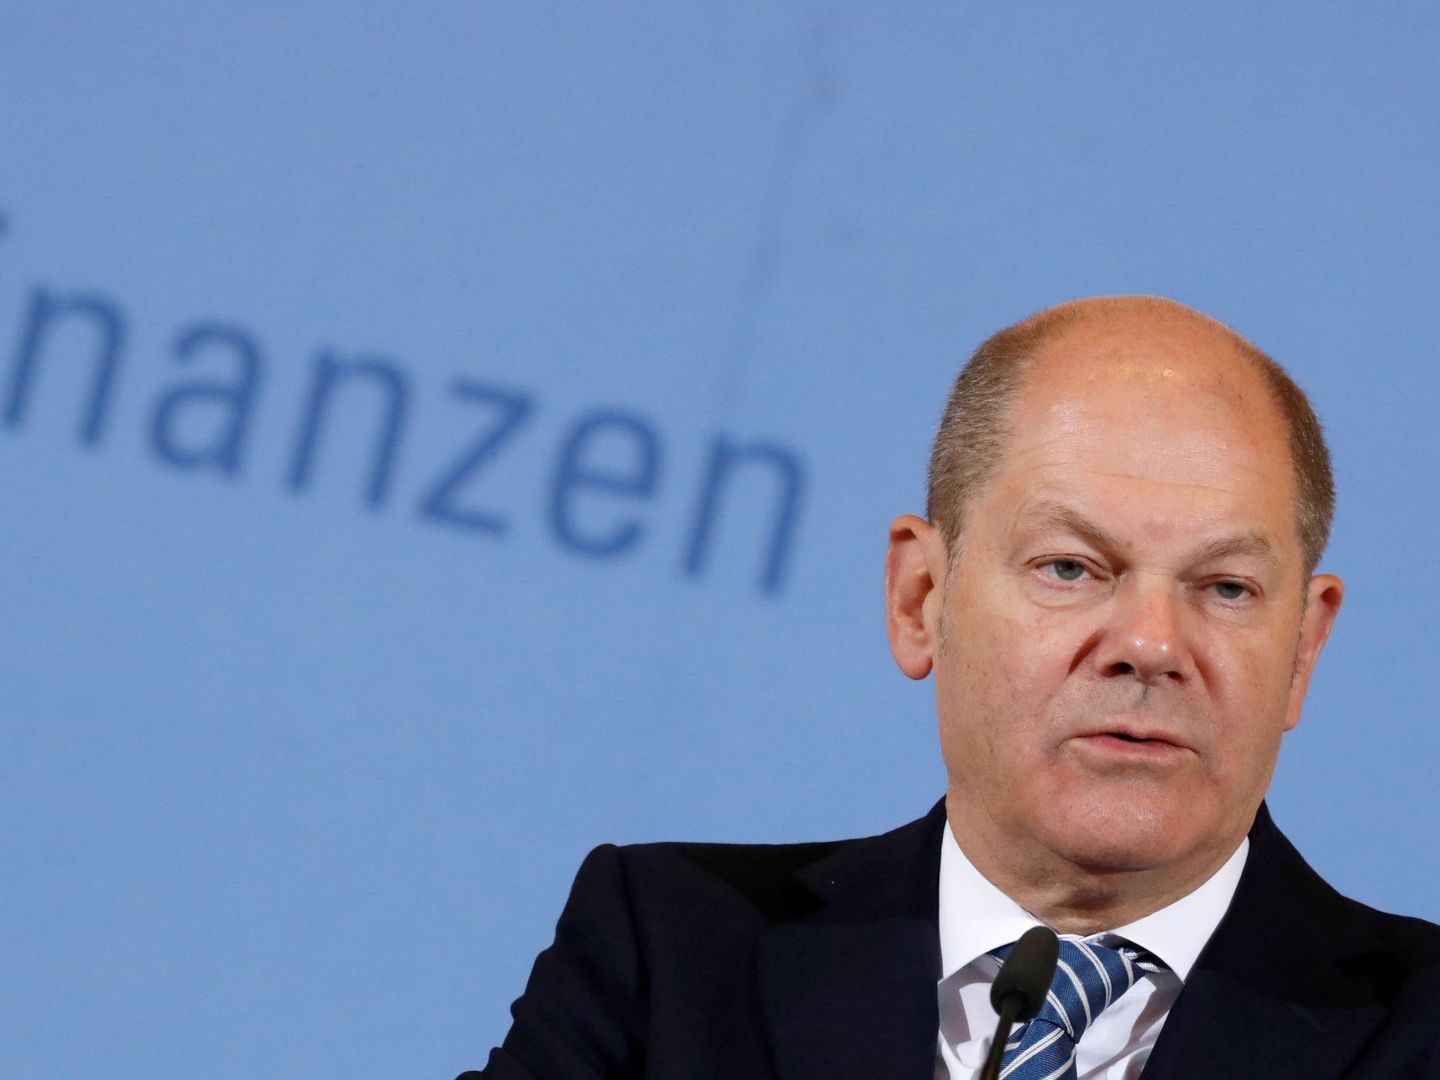 German Finance Minister Olaf Scholz holds a news conference on tax revenues in Berlin, Germany, October 30, 2019. REUTERS Fabrizio Bensch